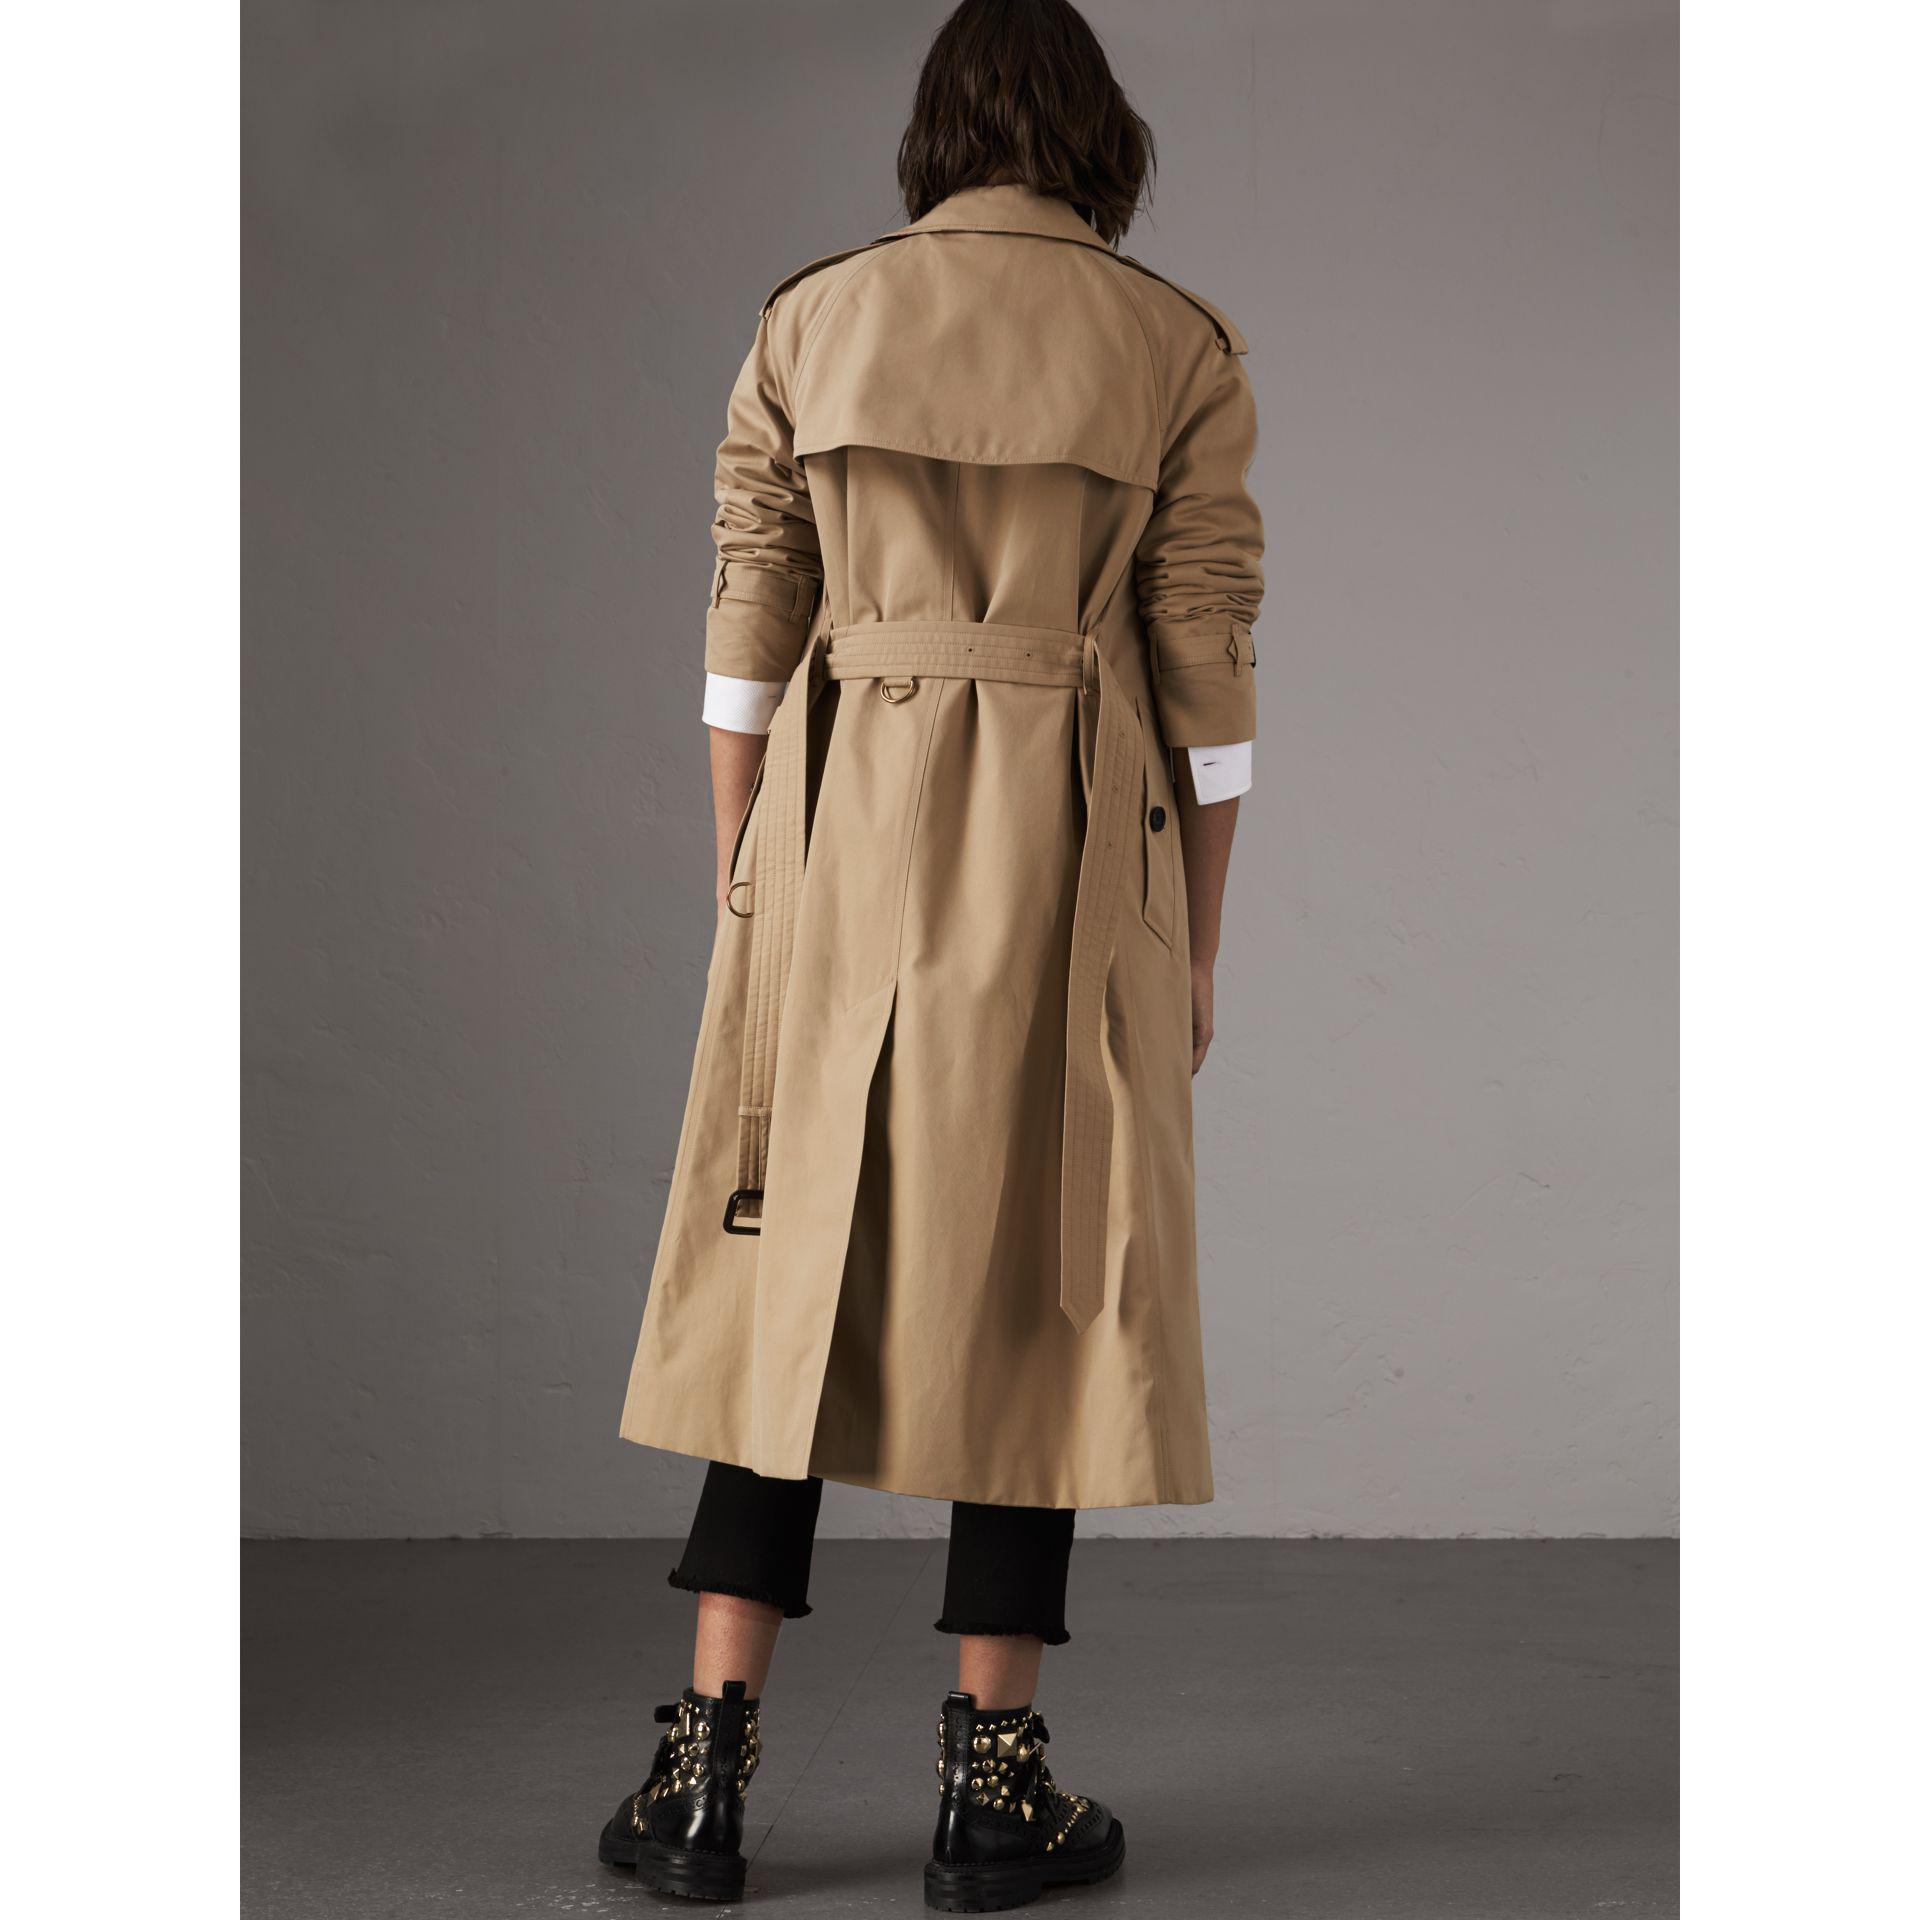 Burberry Cotton The Westminster – Extra-long Trench Coat in Honey (Natural)  - Lyst